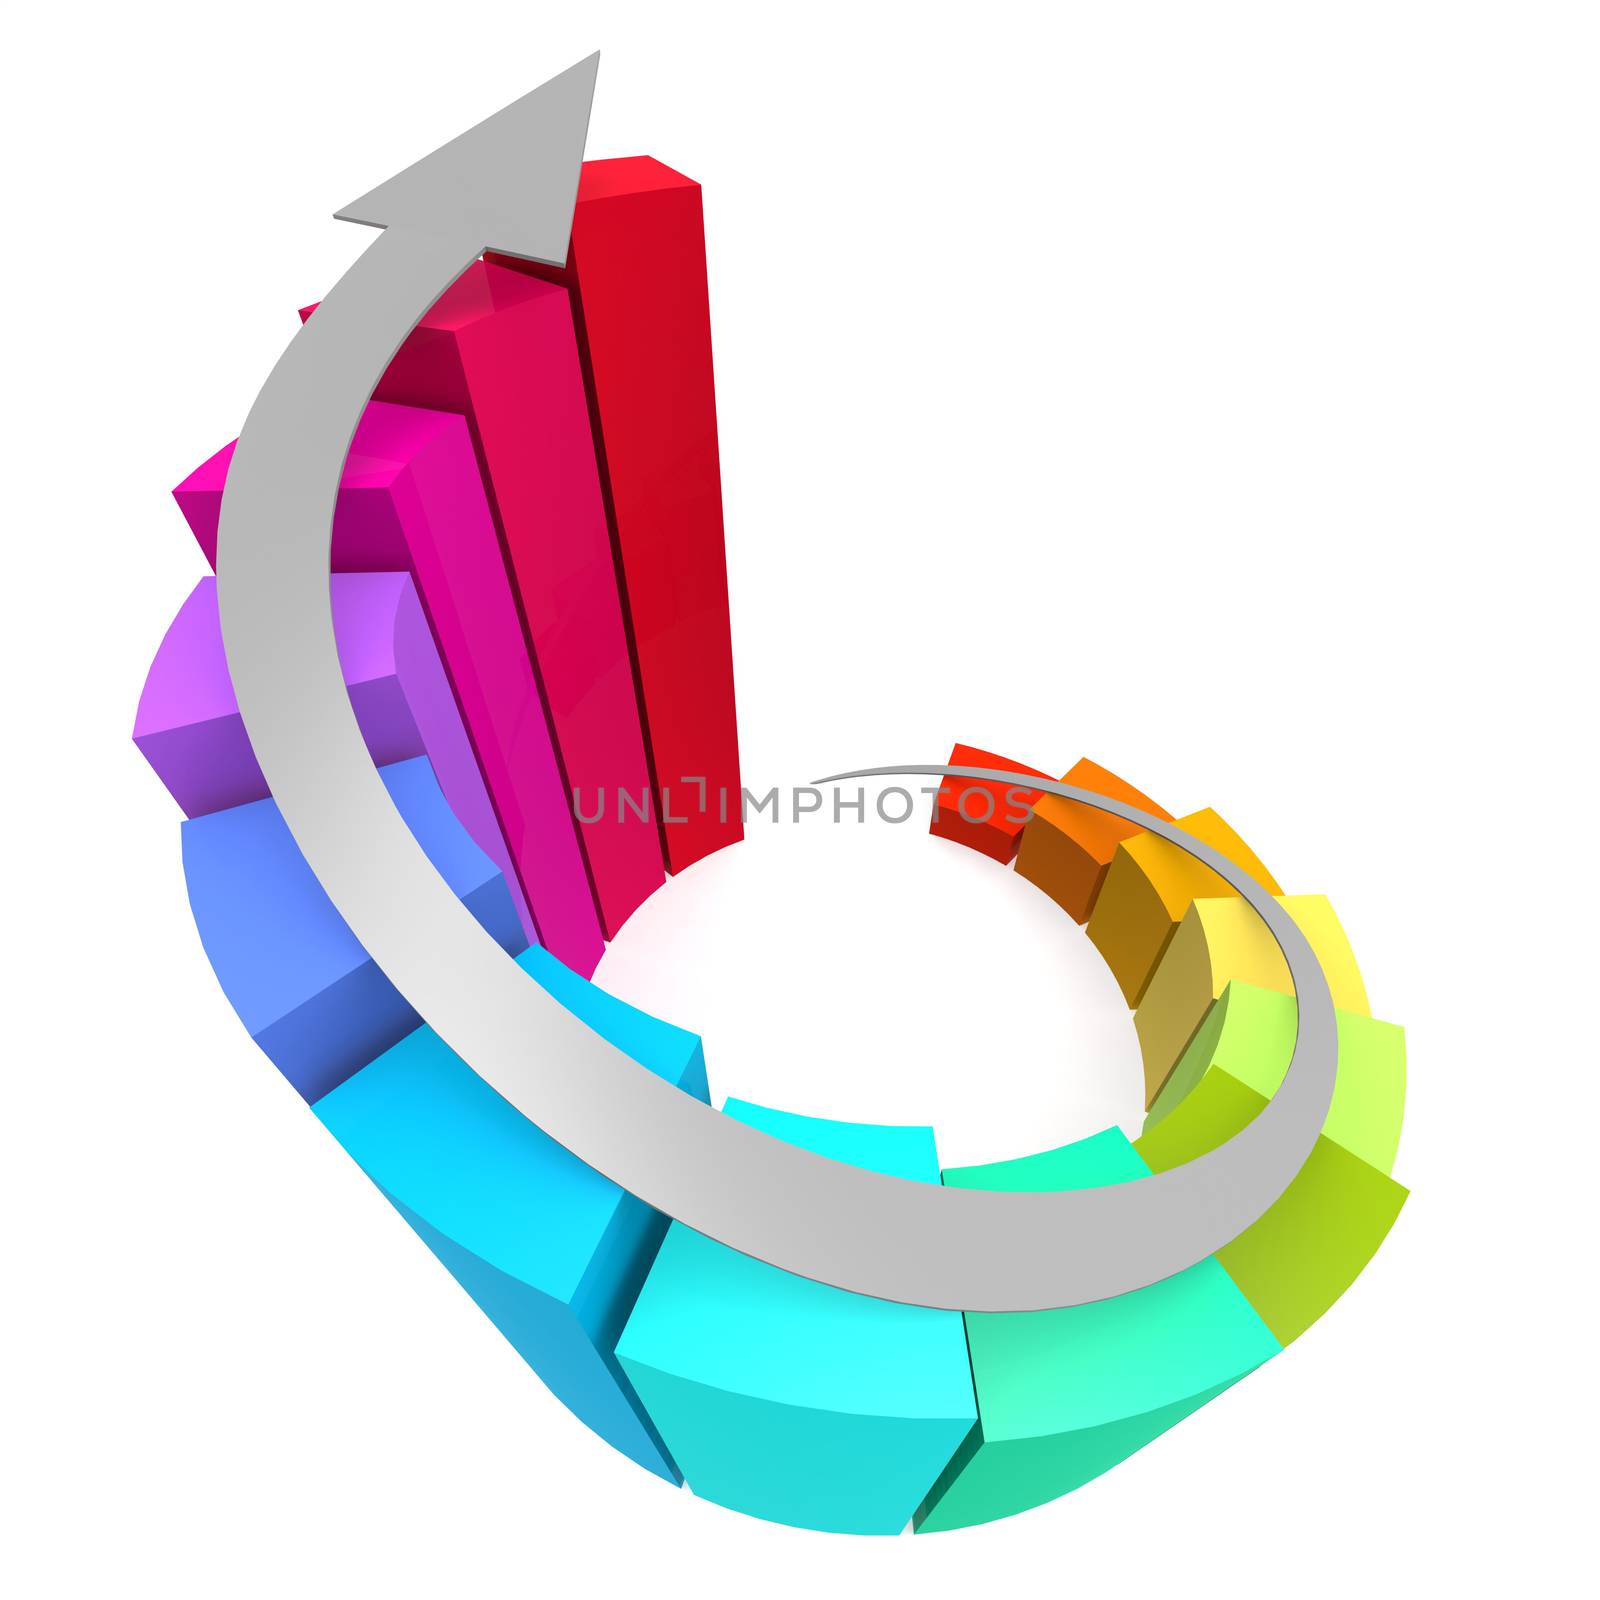 Colorful winding bar chart with arrow image with hi-res rendered artwork that could be used for any graphic design.